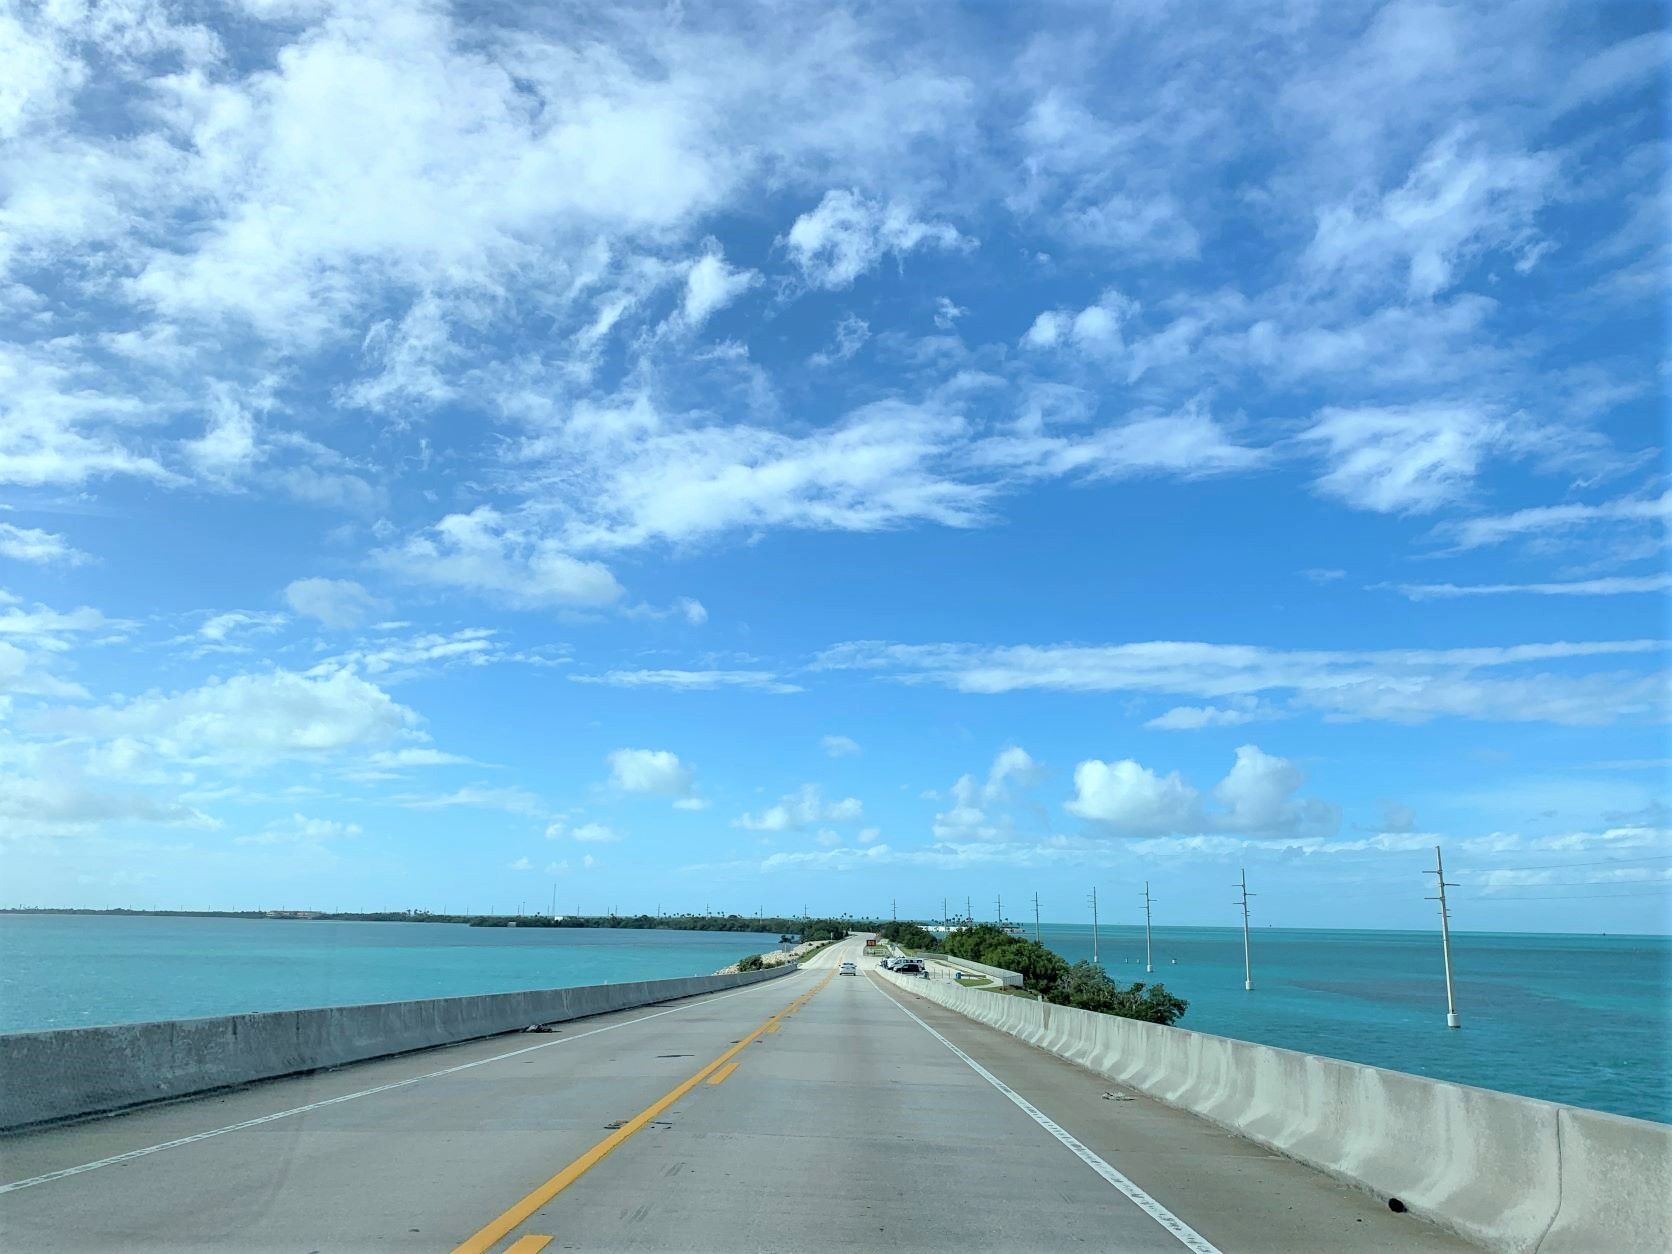 Road Trip: To the End of the Florida Keys